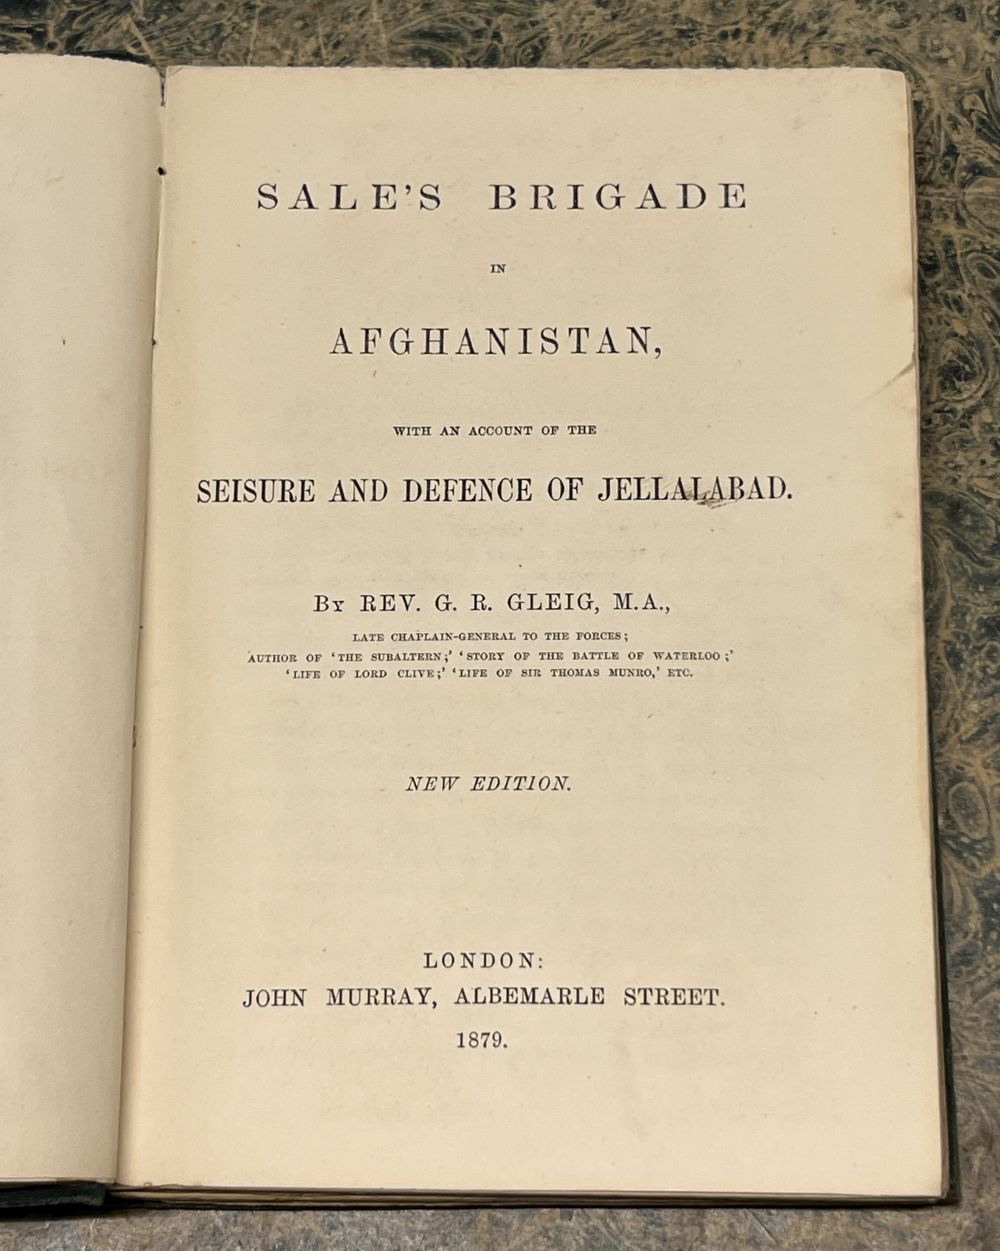 Ali (Shahamat). An Historical Account of the Sikhs and Afghans, circa 1850 - Image 11 of 11